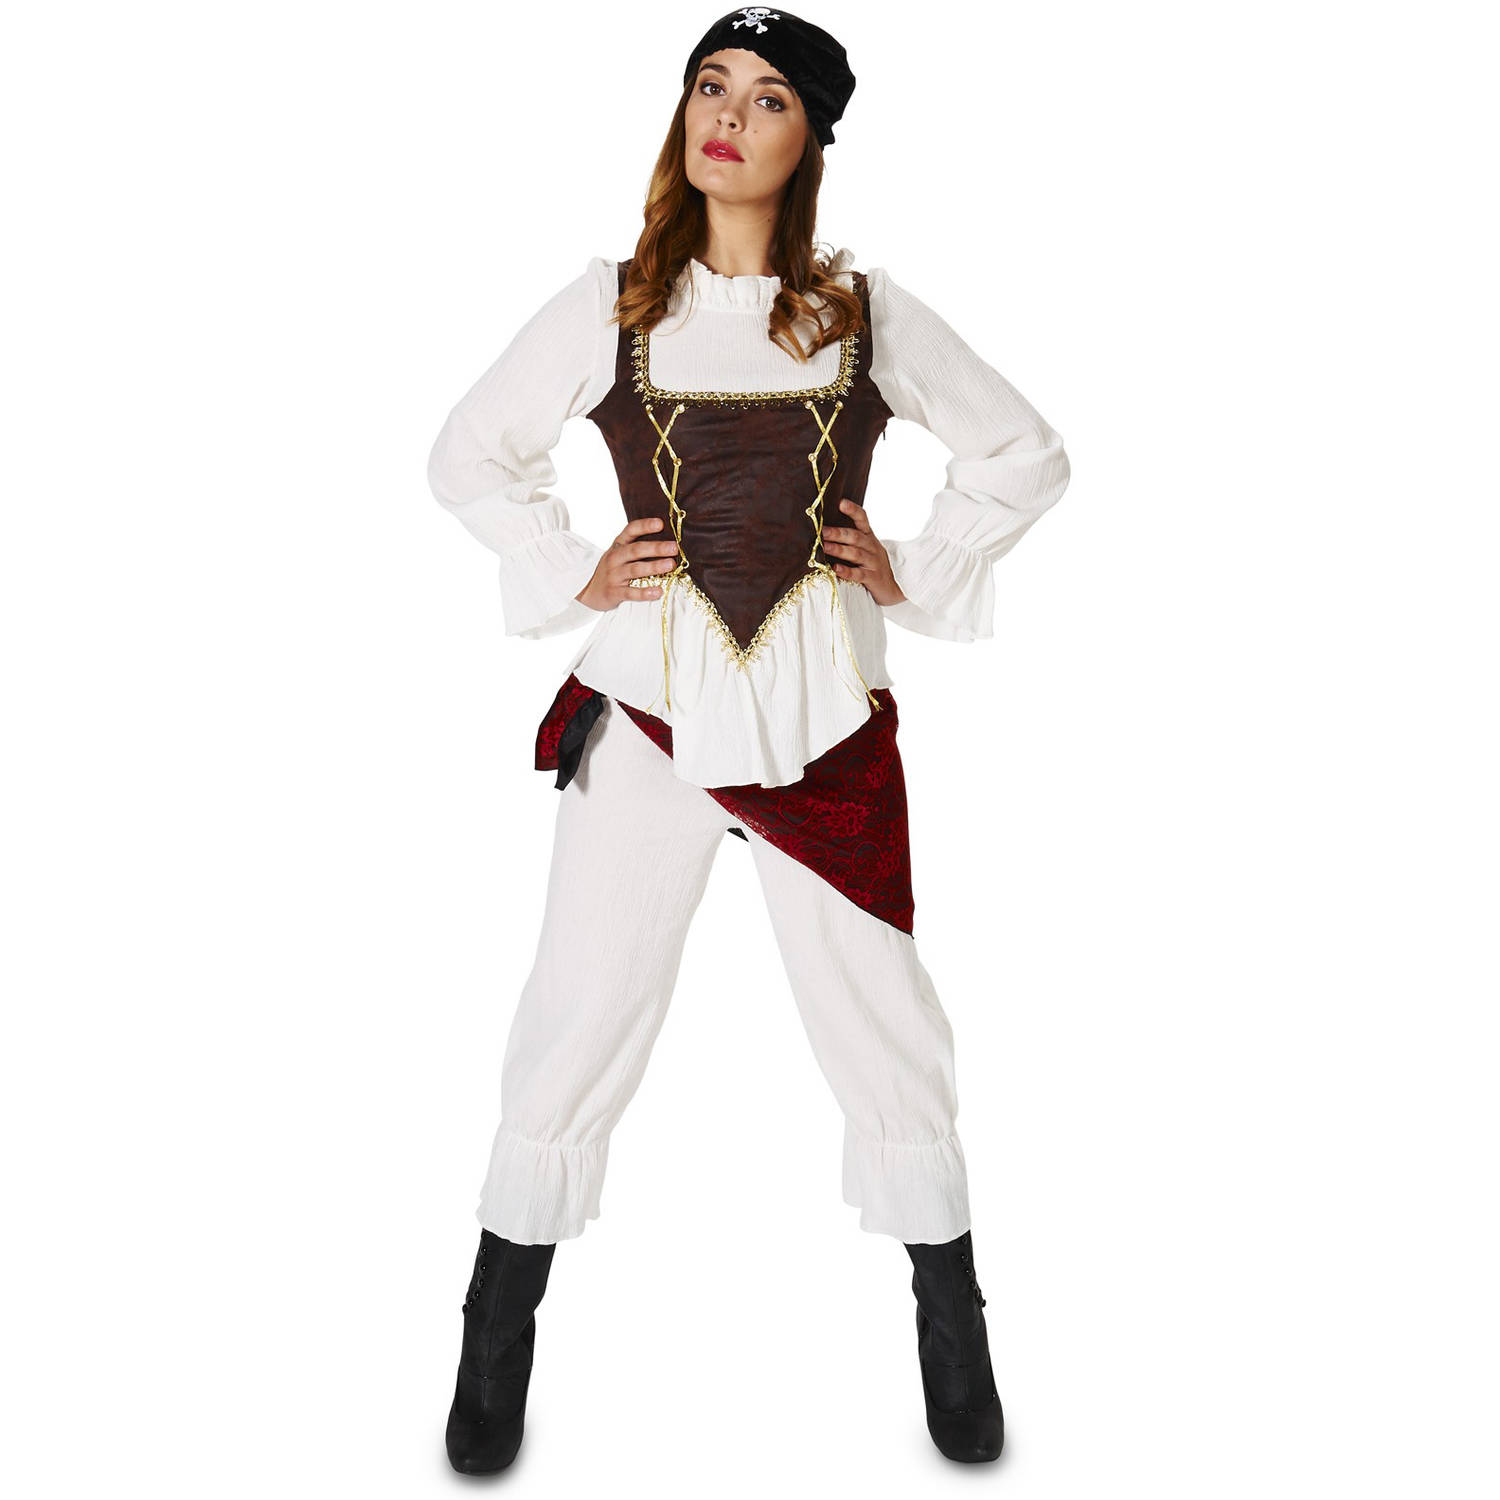 Pirate Lady with Bloomers Women's Adult Halloween Costume - Walmart.com